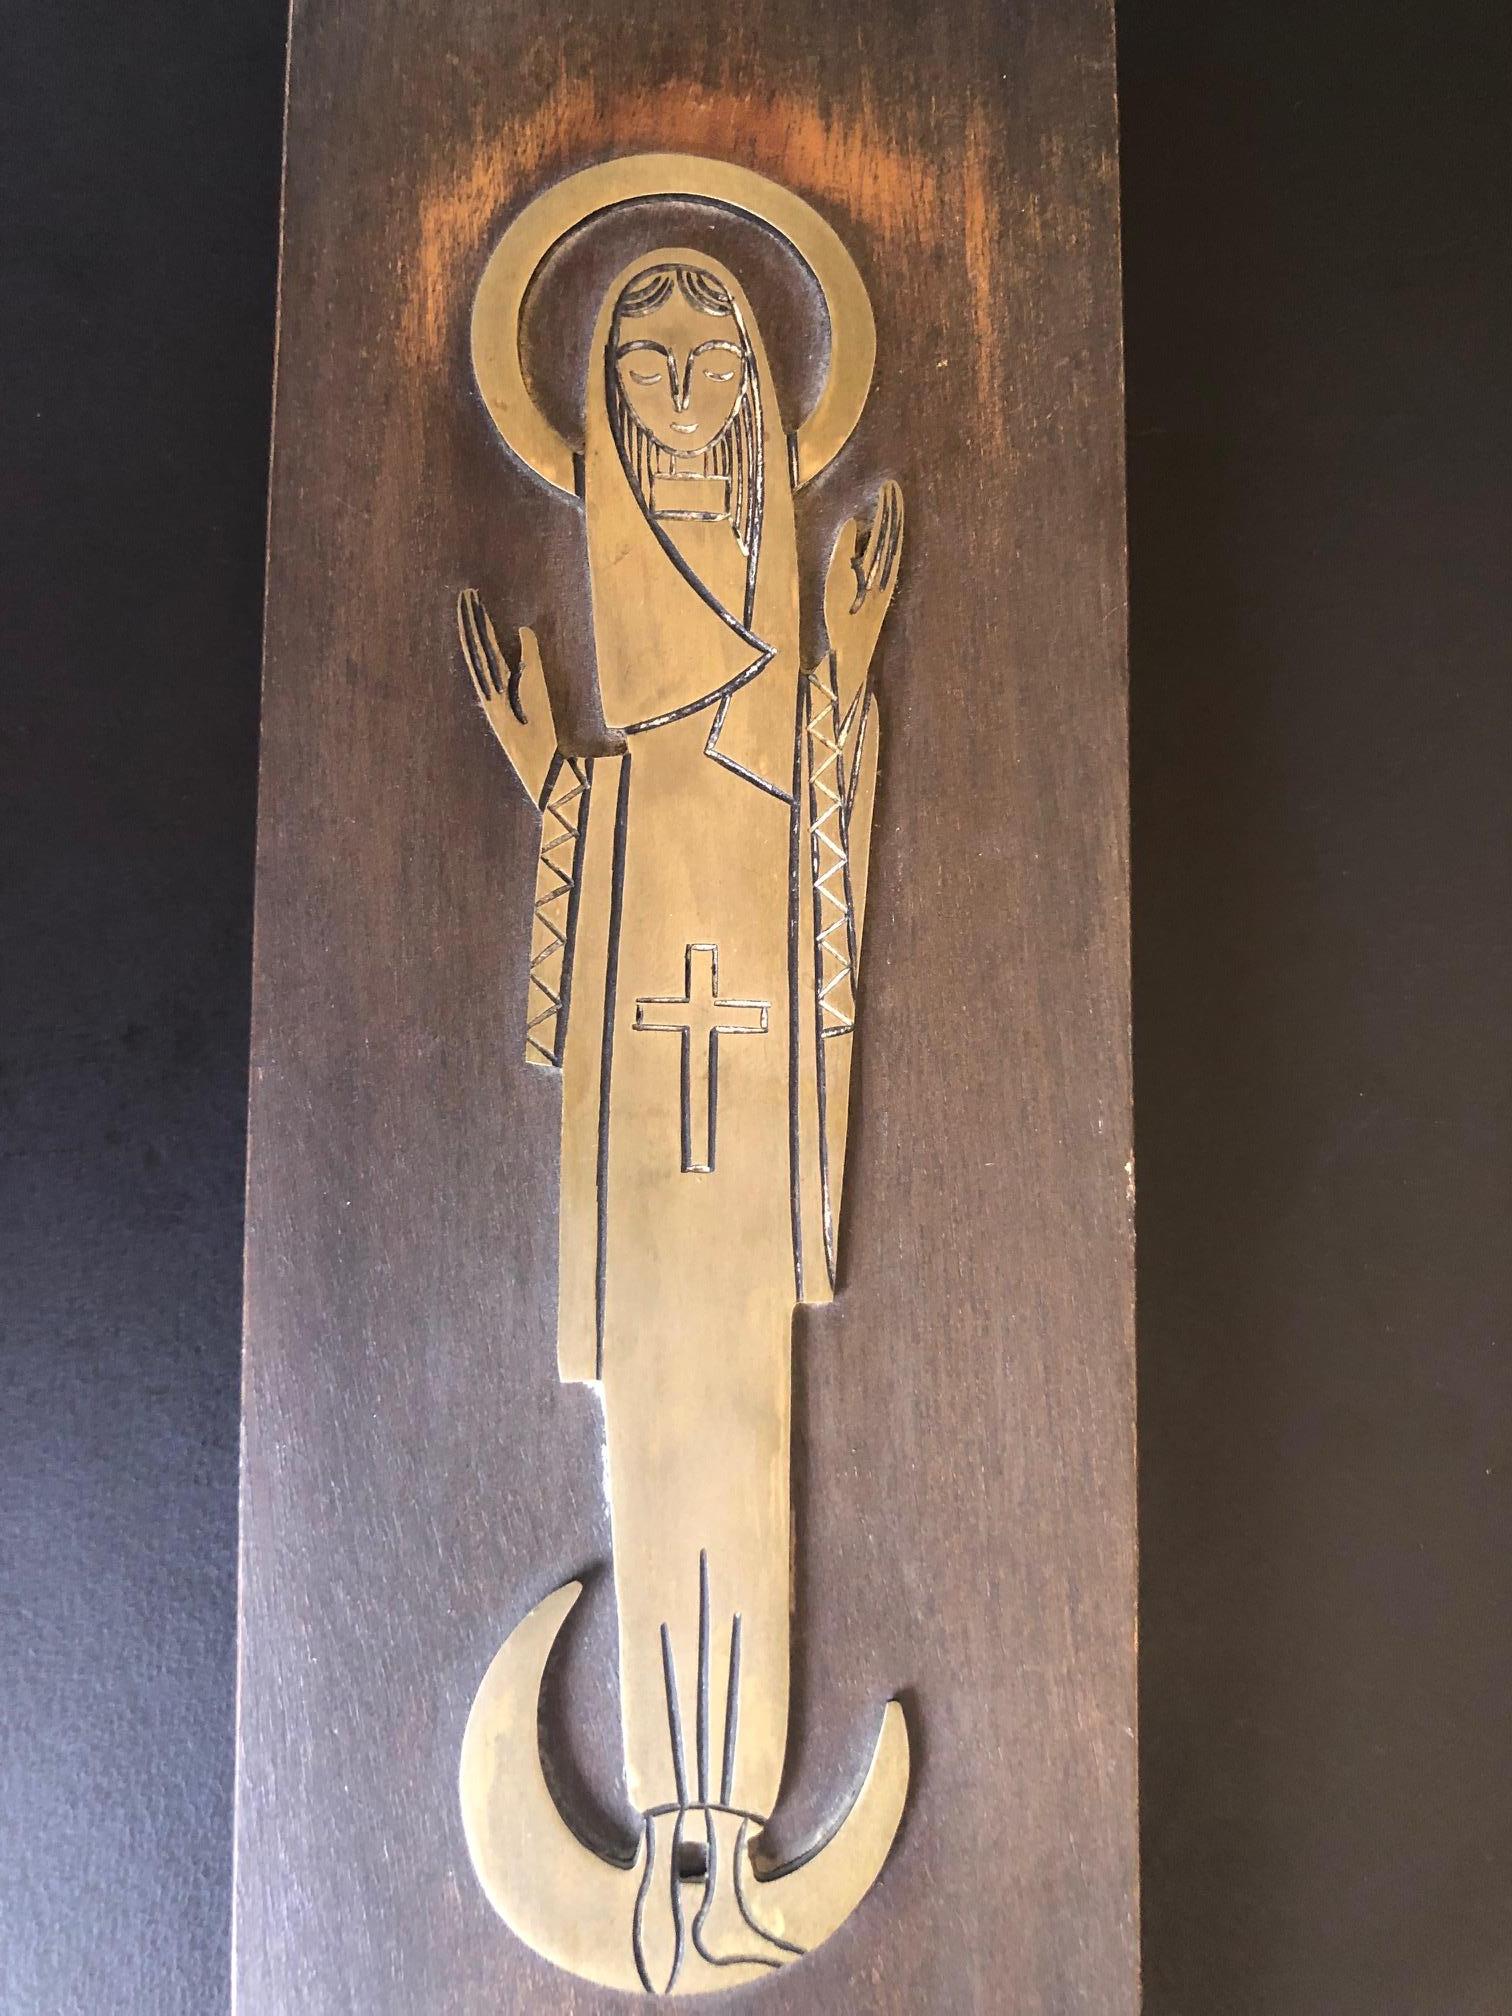 A very nice and simple religious plaque or icon of Mary the mother of Jesus. The piece is bas-relief in brass on a wood plaque, circa 1960s.